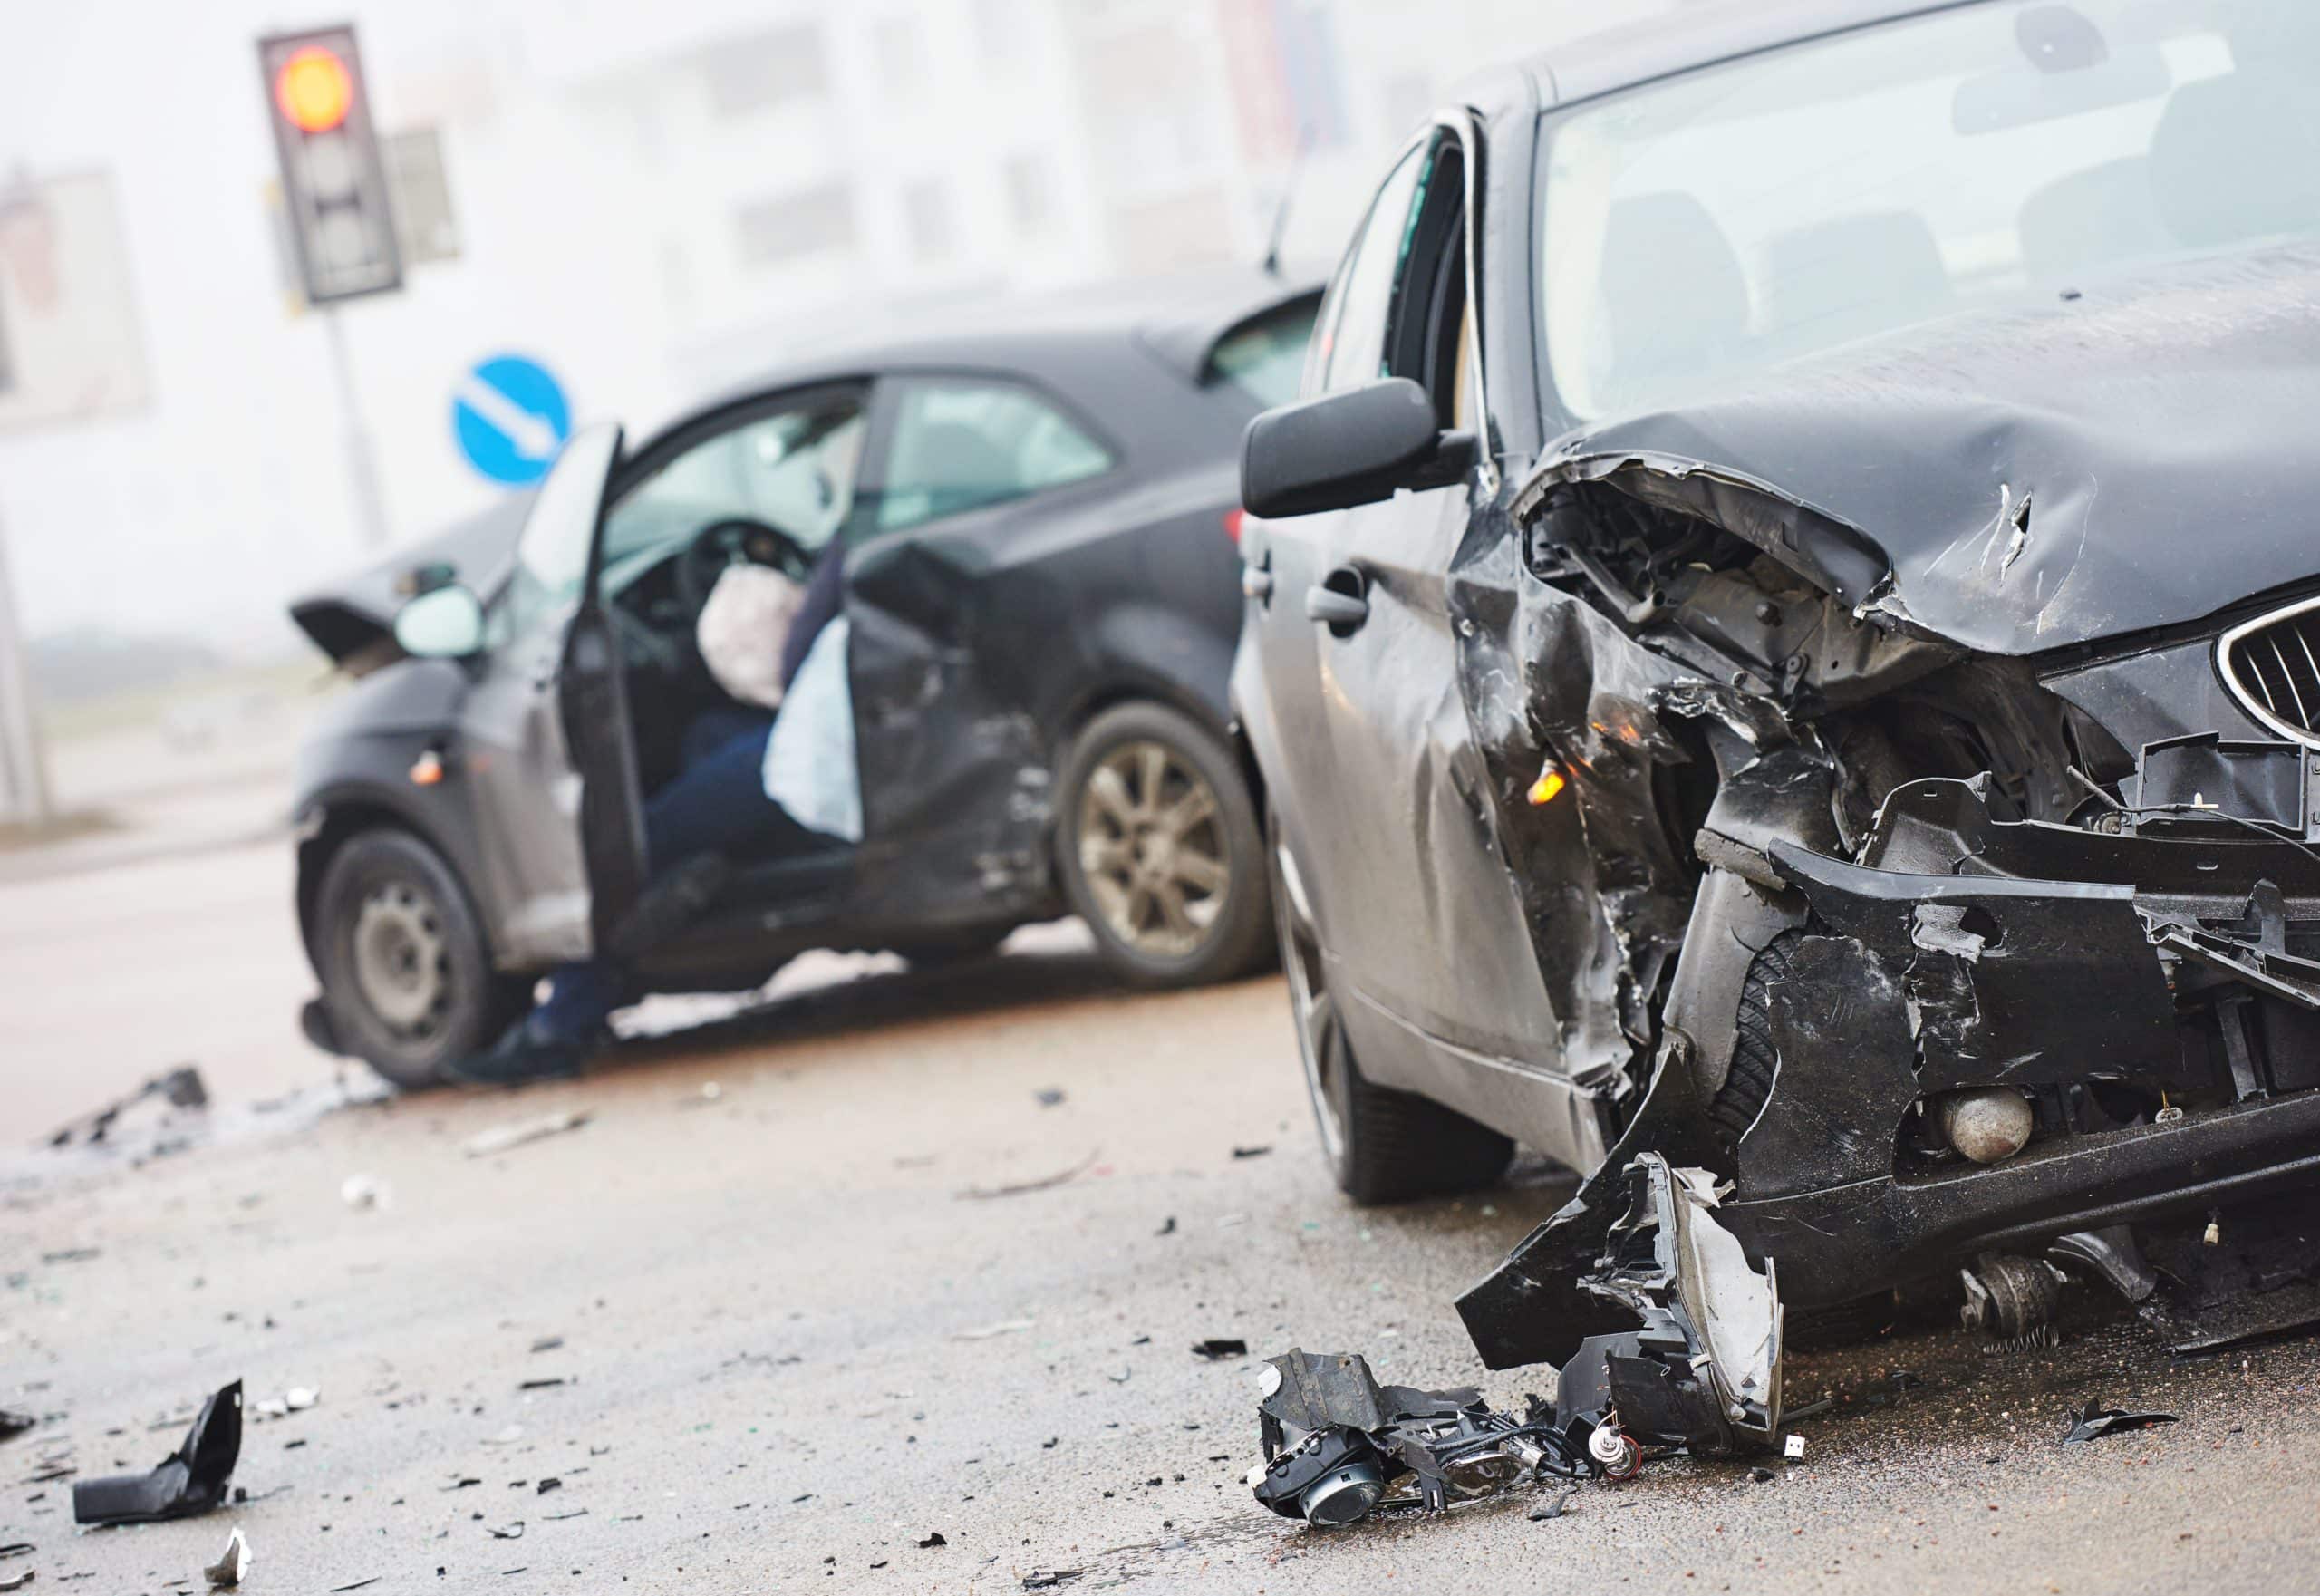 Legal Steps To Take After A Fatal Car Accident